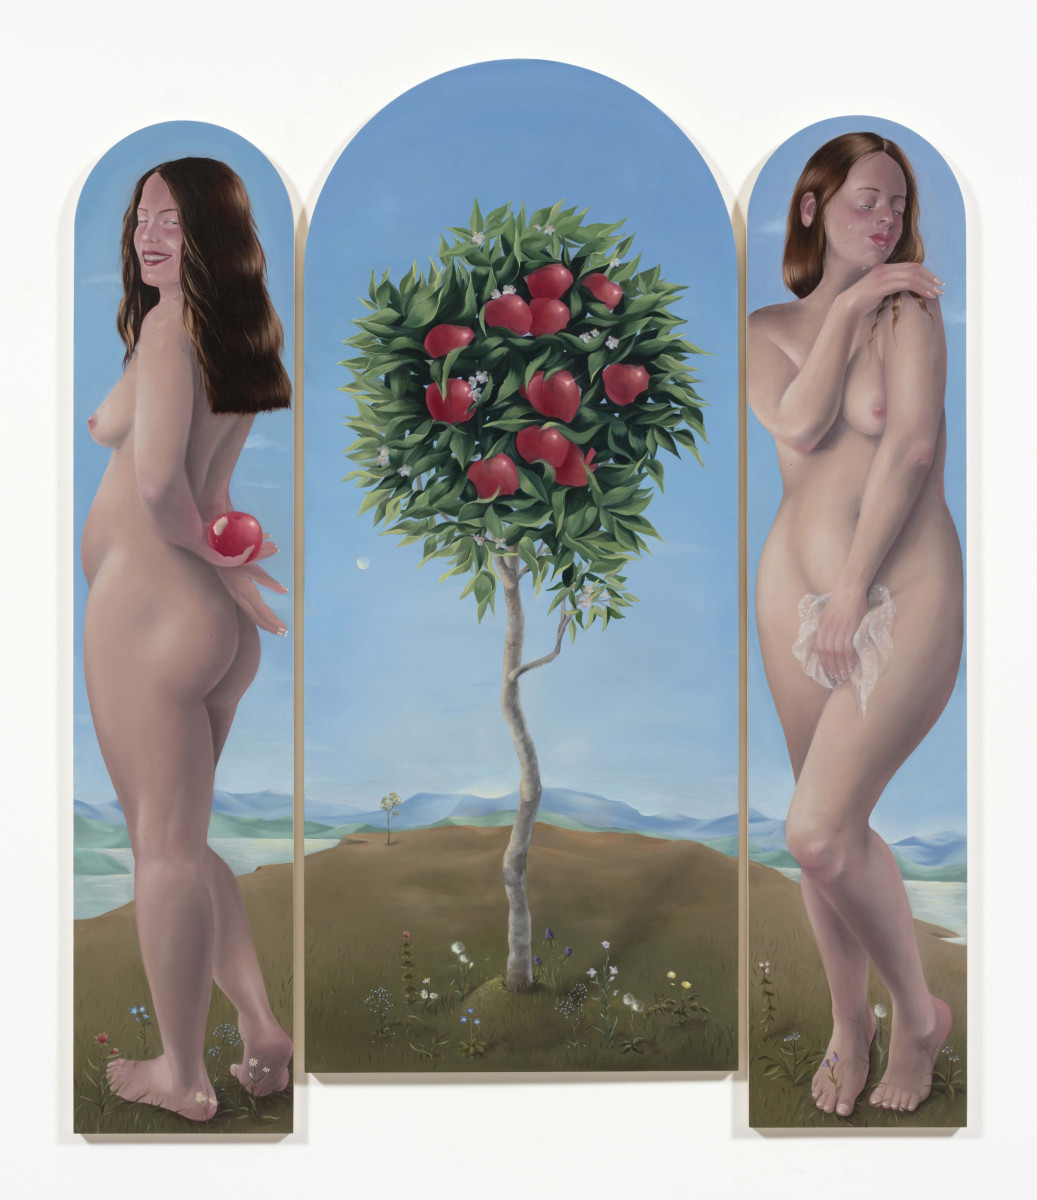 Natalia Gonzalez Martin. <em>It wasn't even that good</em>, 2023. Oil on panel, Dimensions variable, left and right panel are 63 x 11 3/4 inches 160 x 30 cm) and middle panel is 63 x 23 5/8 inches  (160 x 60 cm)